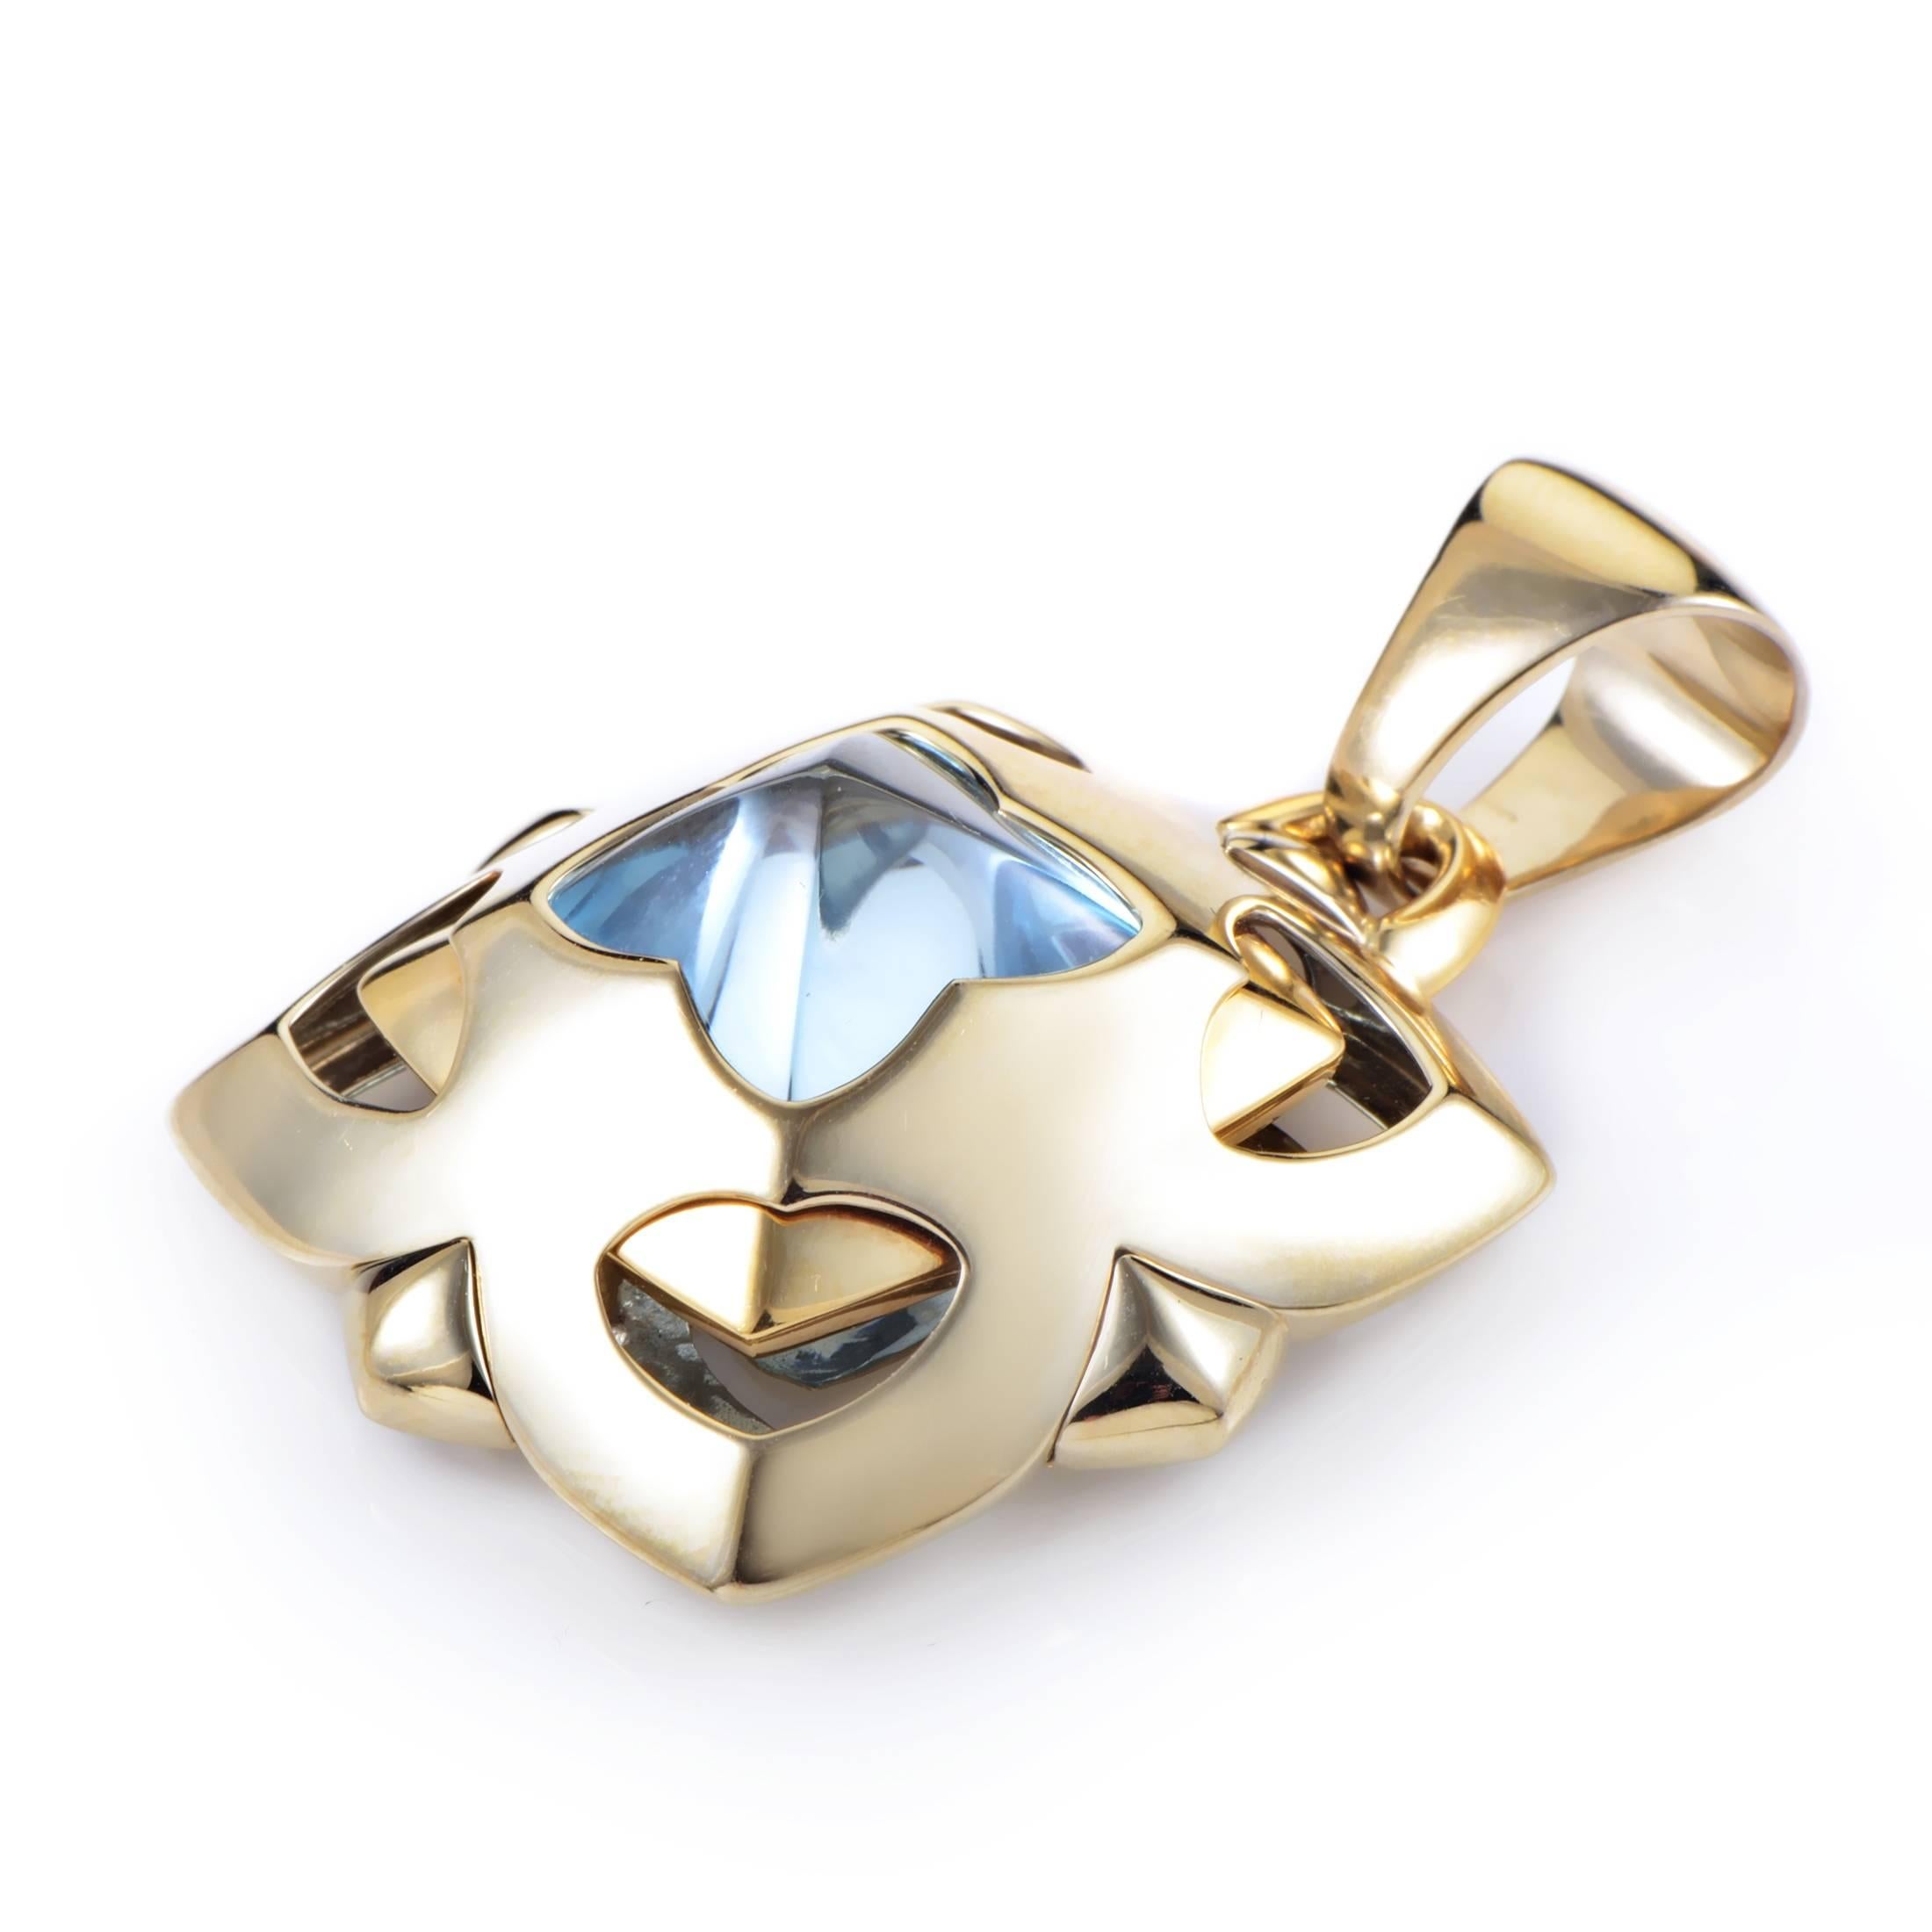 This enhancer pendant from Bvlgari's Piramide collection is truly eye-catching. The pendant is made of both 18K yellow and white gold and features a brilliant blue topaz stone.